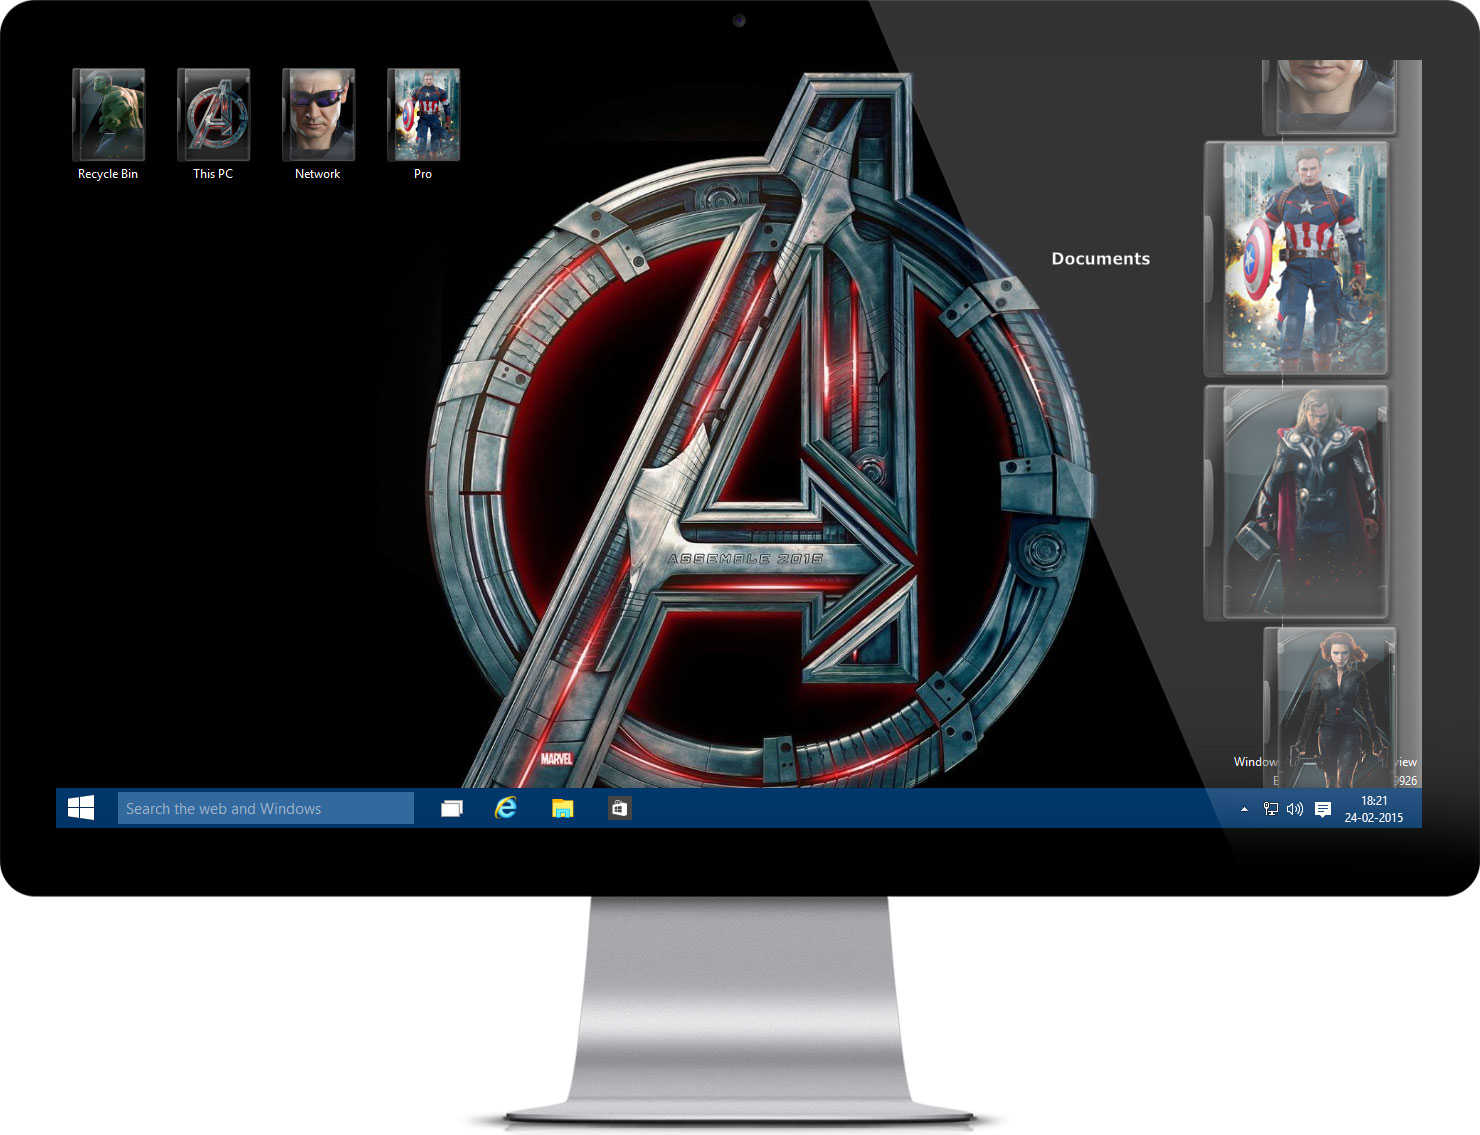 Look Of Desktop With All New Avengers Wallpaper And Icons